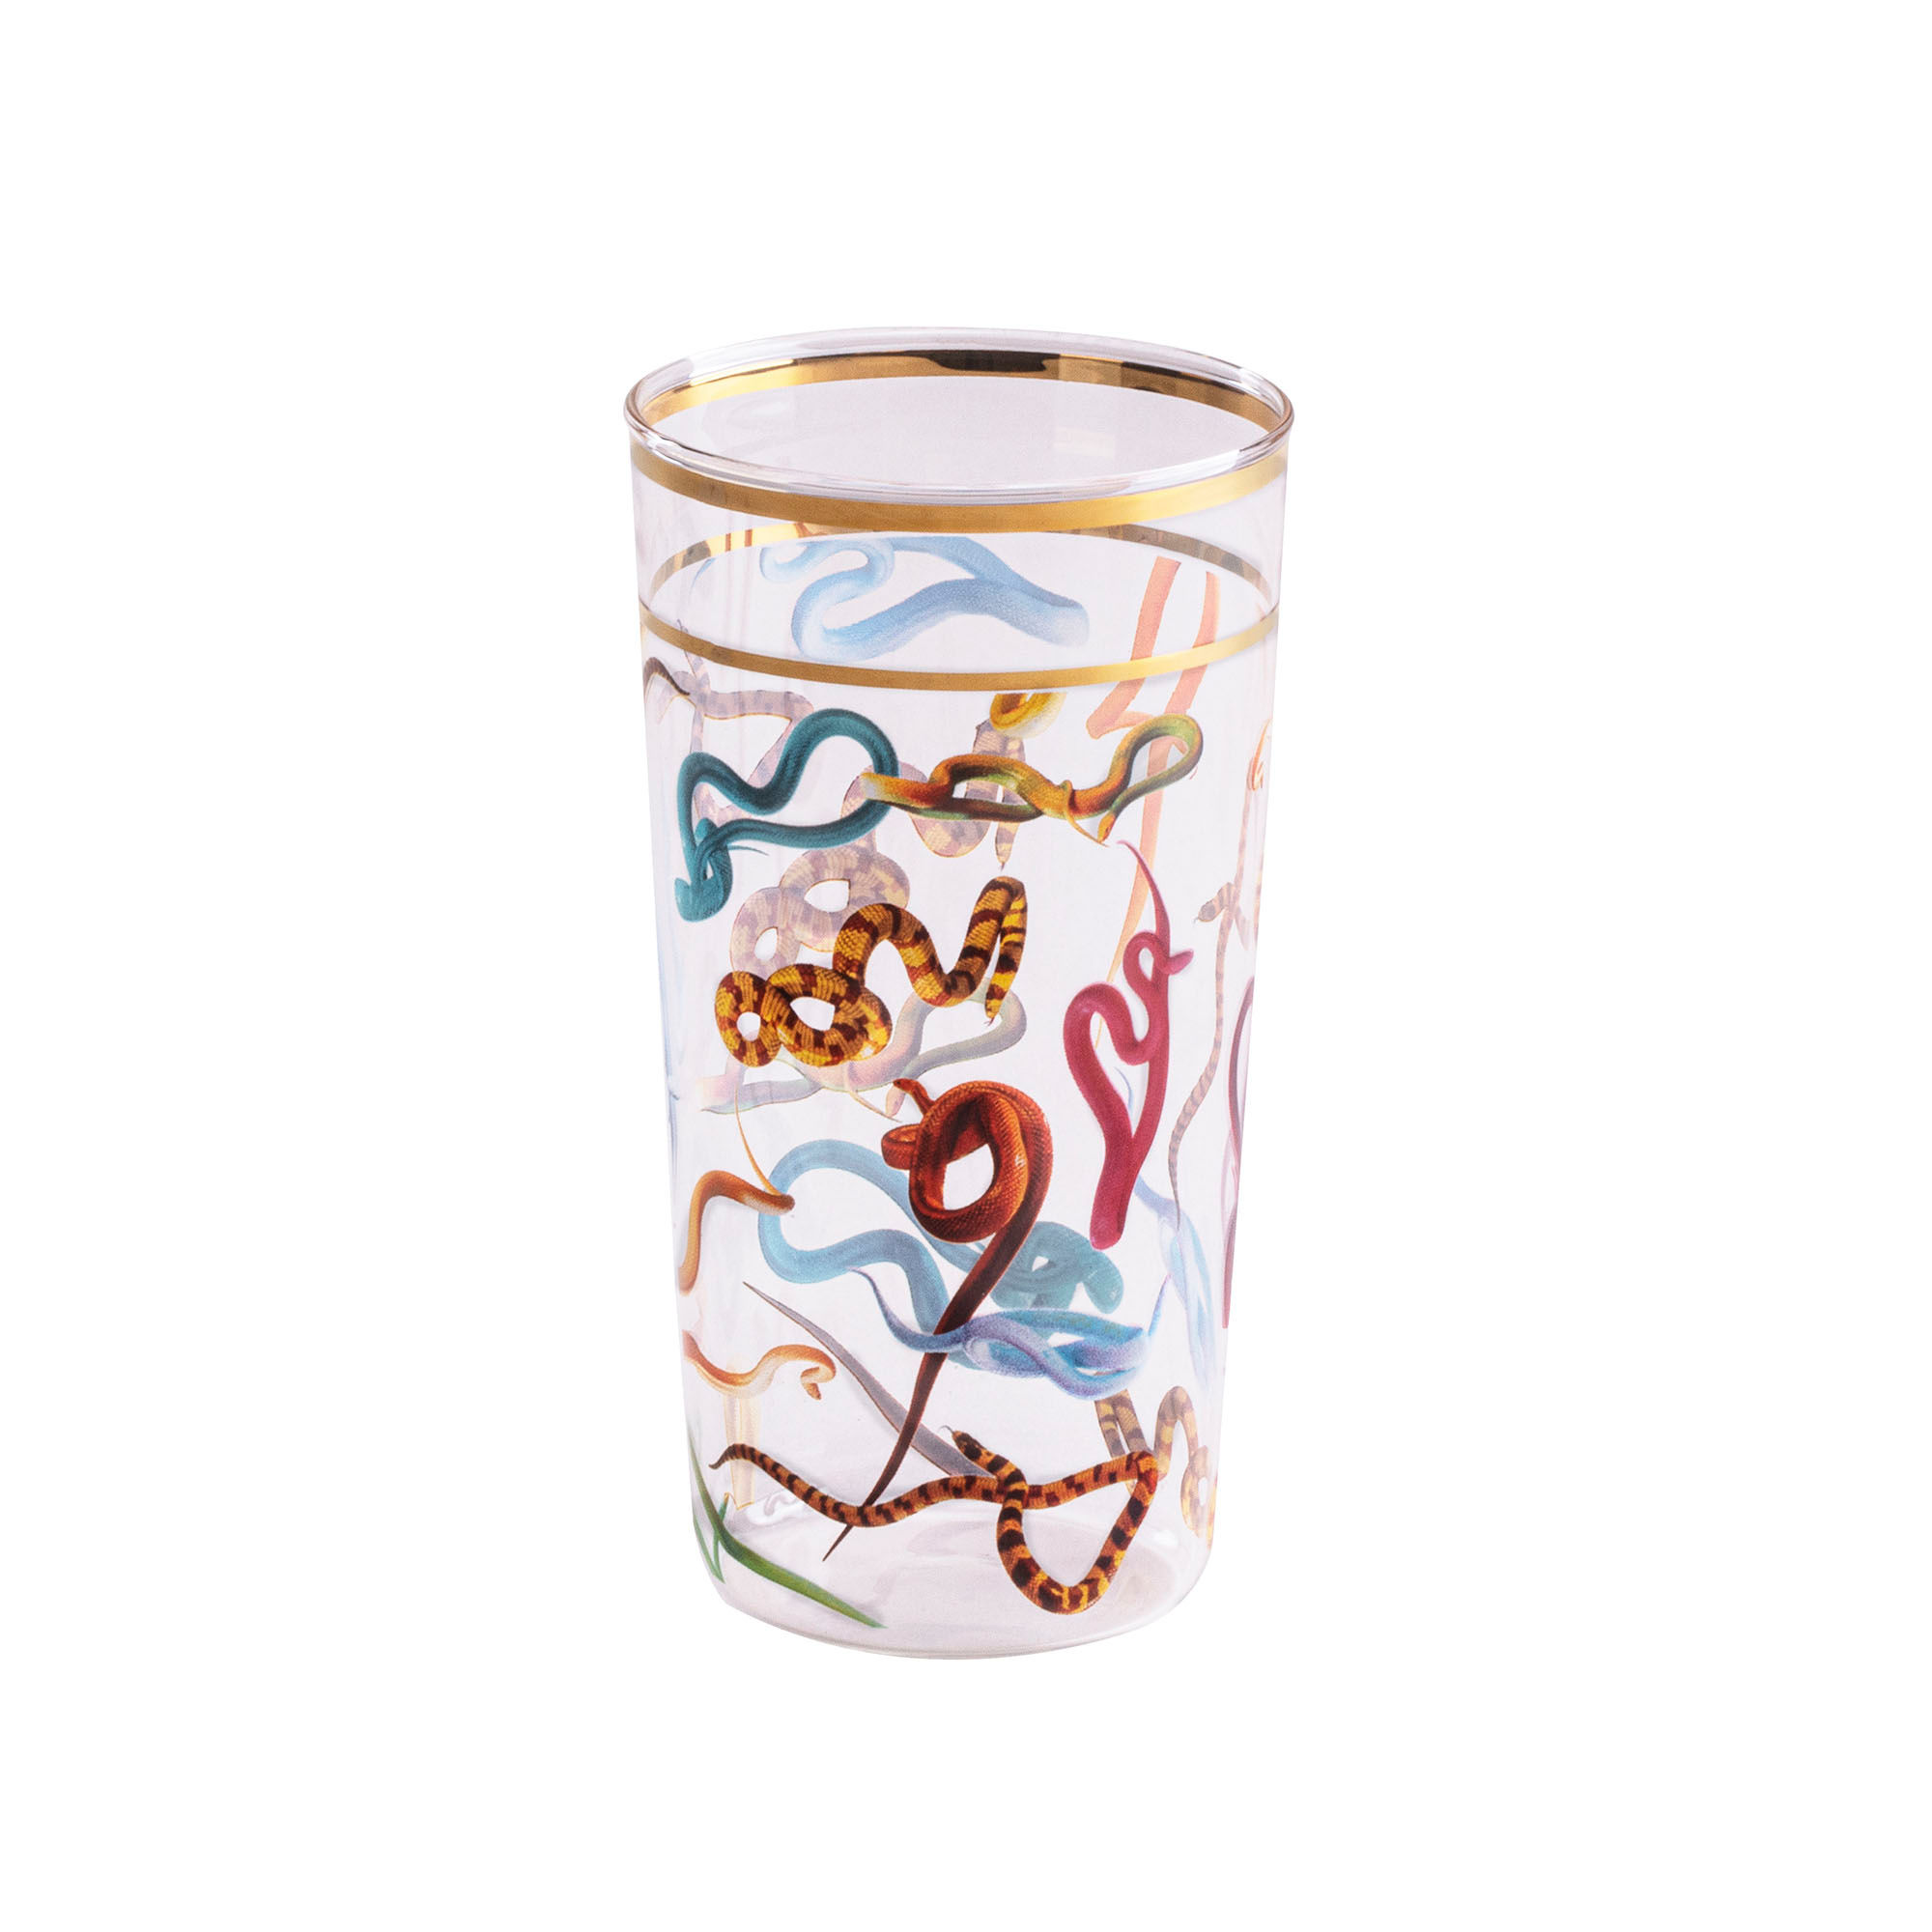 Toiletpaper - Snakes Glass by Seletti